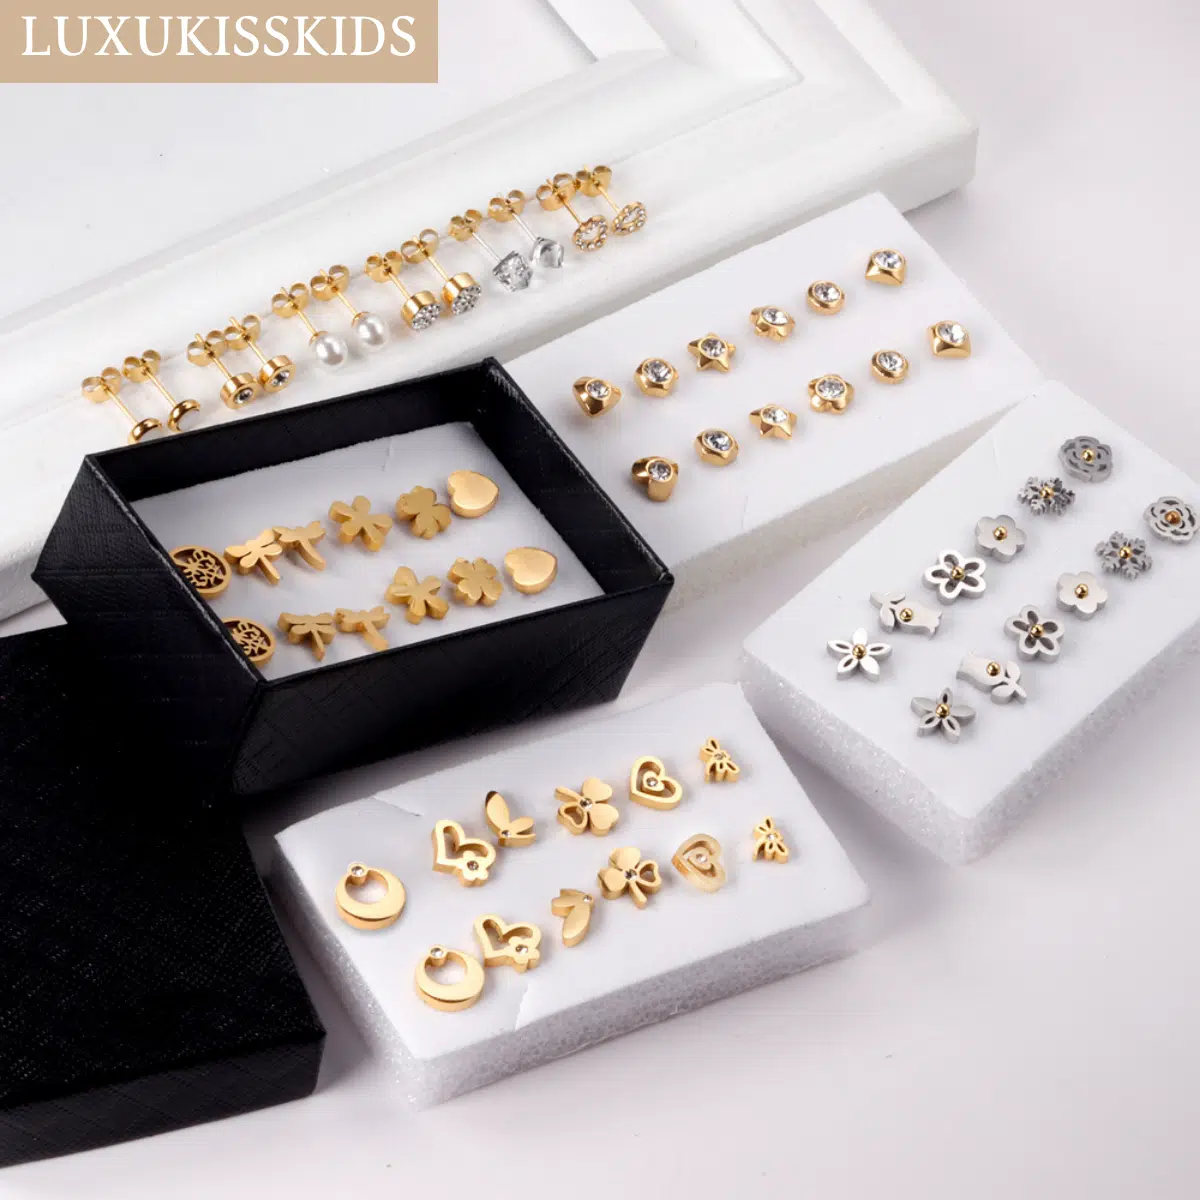 Luxukisskids-earrings-set-for-women-stainless-steel-6pairs-box-piercing-316l-valentines-day-hypoallerge-small-brinco